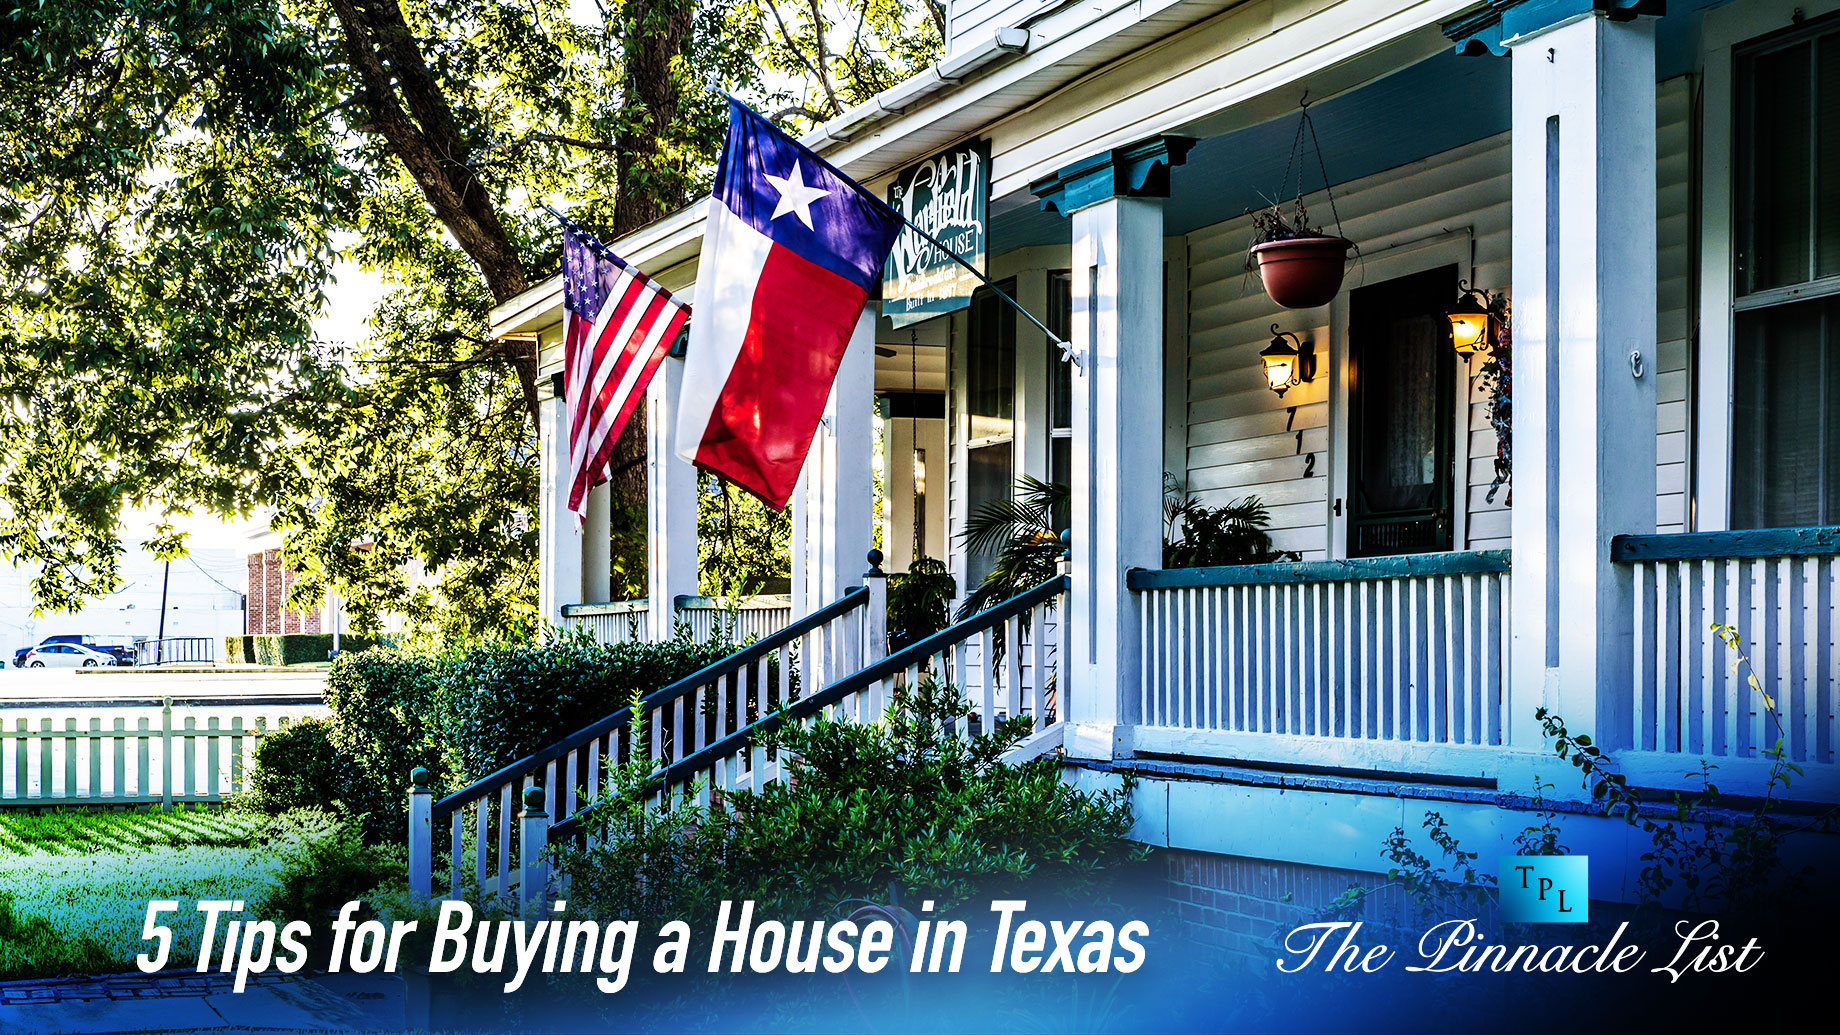 5 Tips for Buying a House in Texas